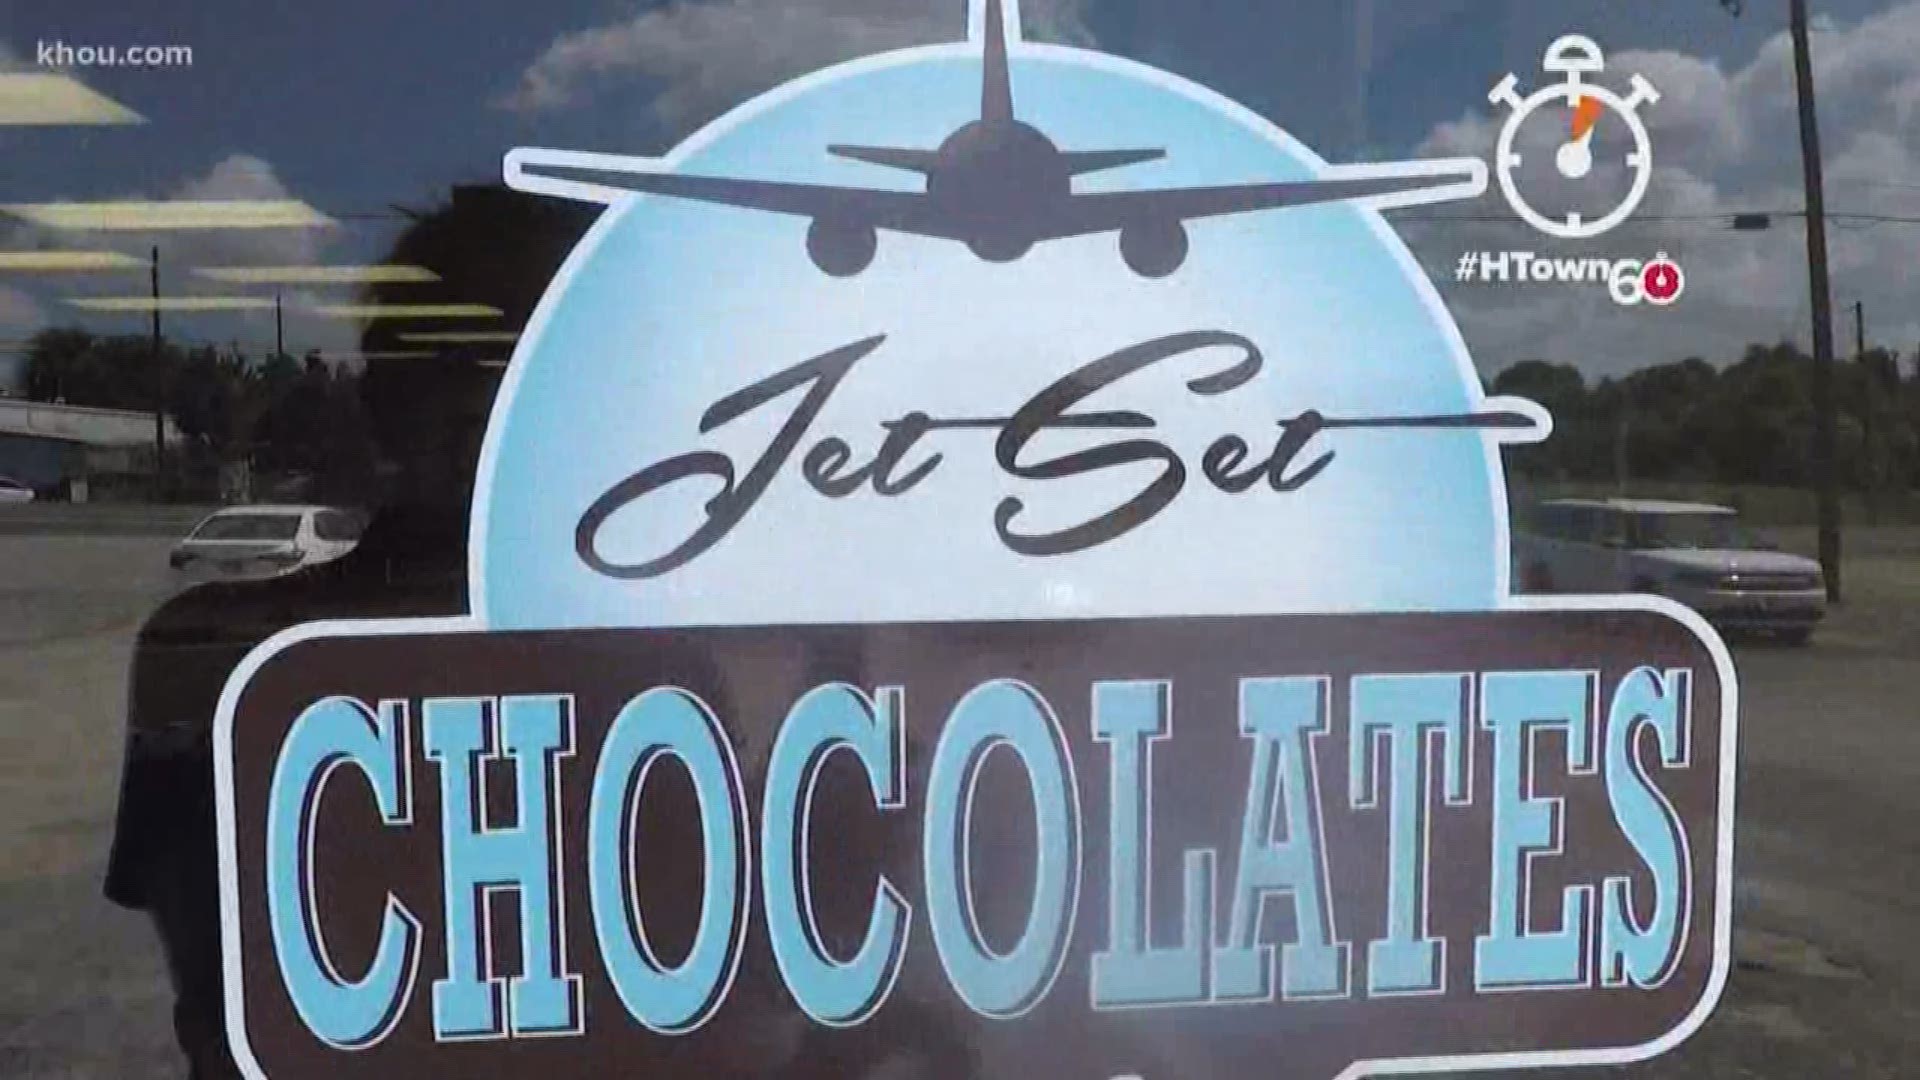 In this morning's HTown60, we are traveling up to Brenham and going to see Jet Set Chocolates. But why is it called Jet Set Chocolates? Brandi Smith has more.